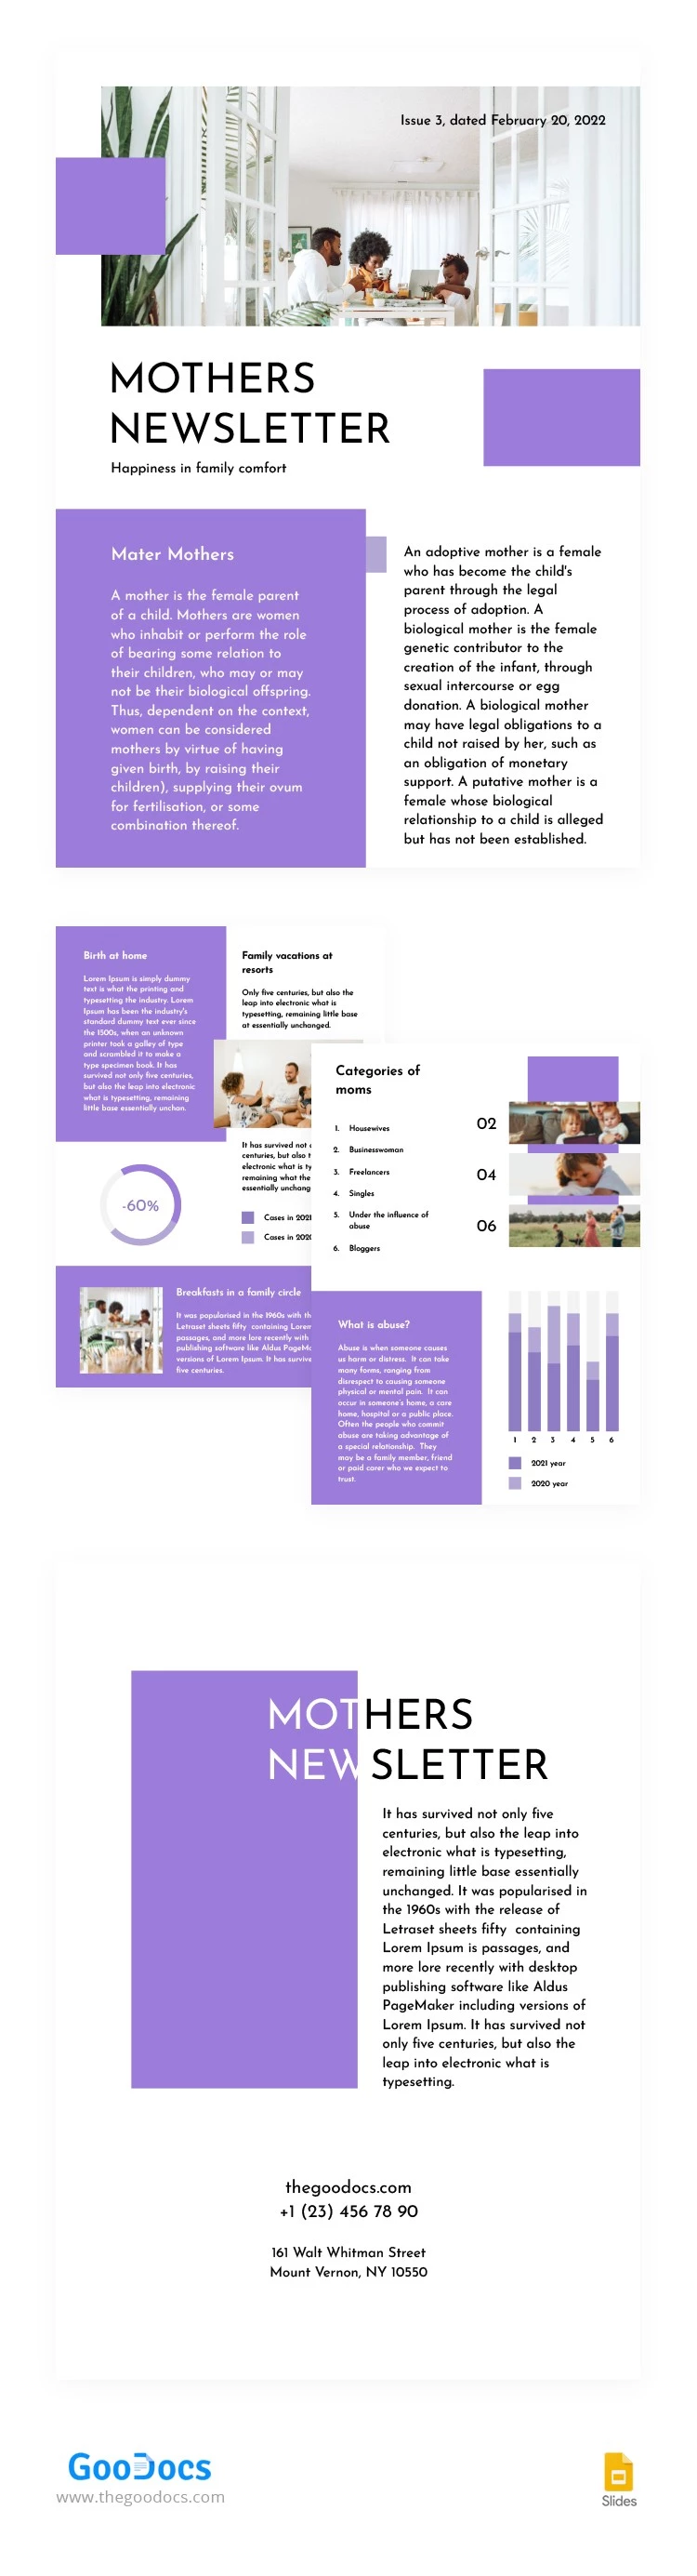 Mothers Newsletter - free Google Docs Template - 10063491